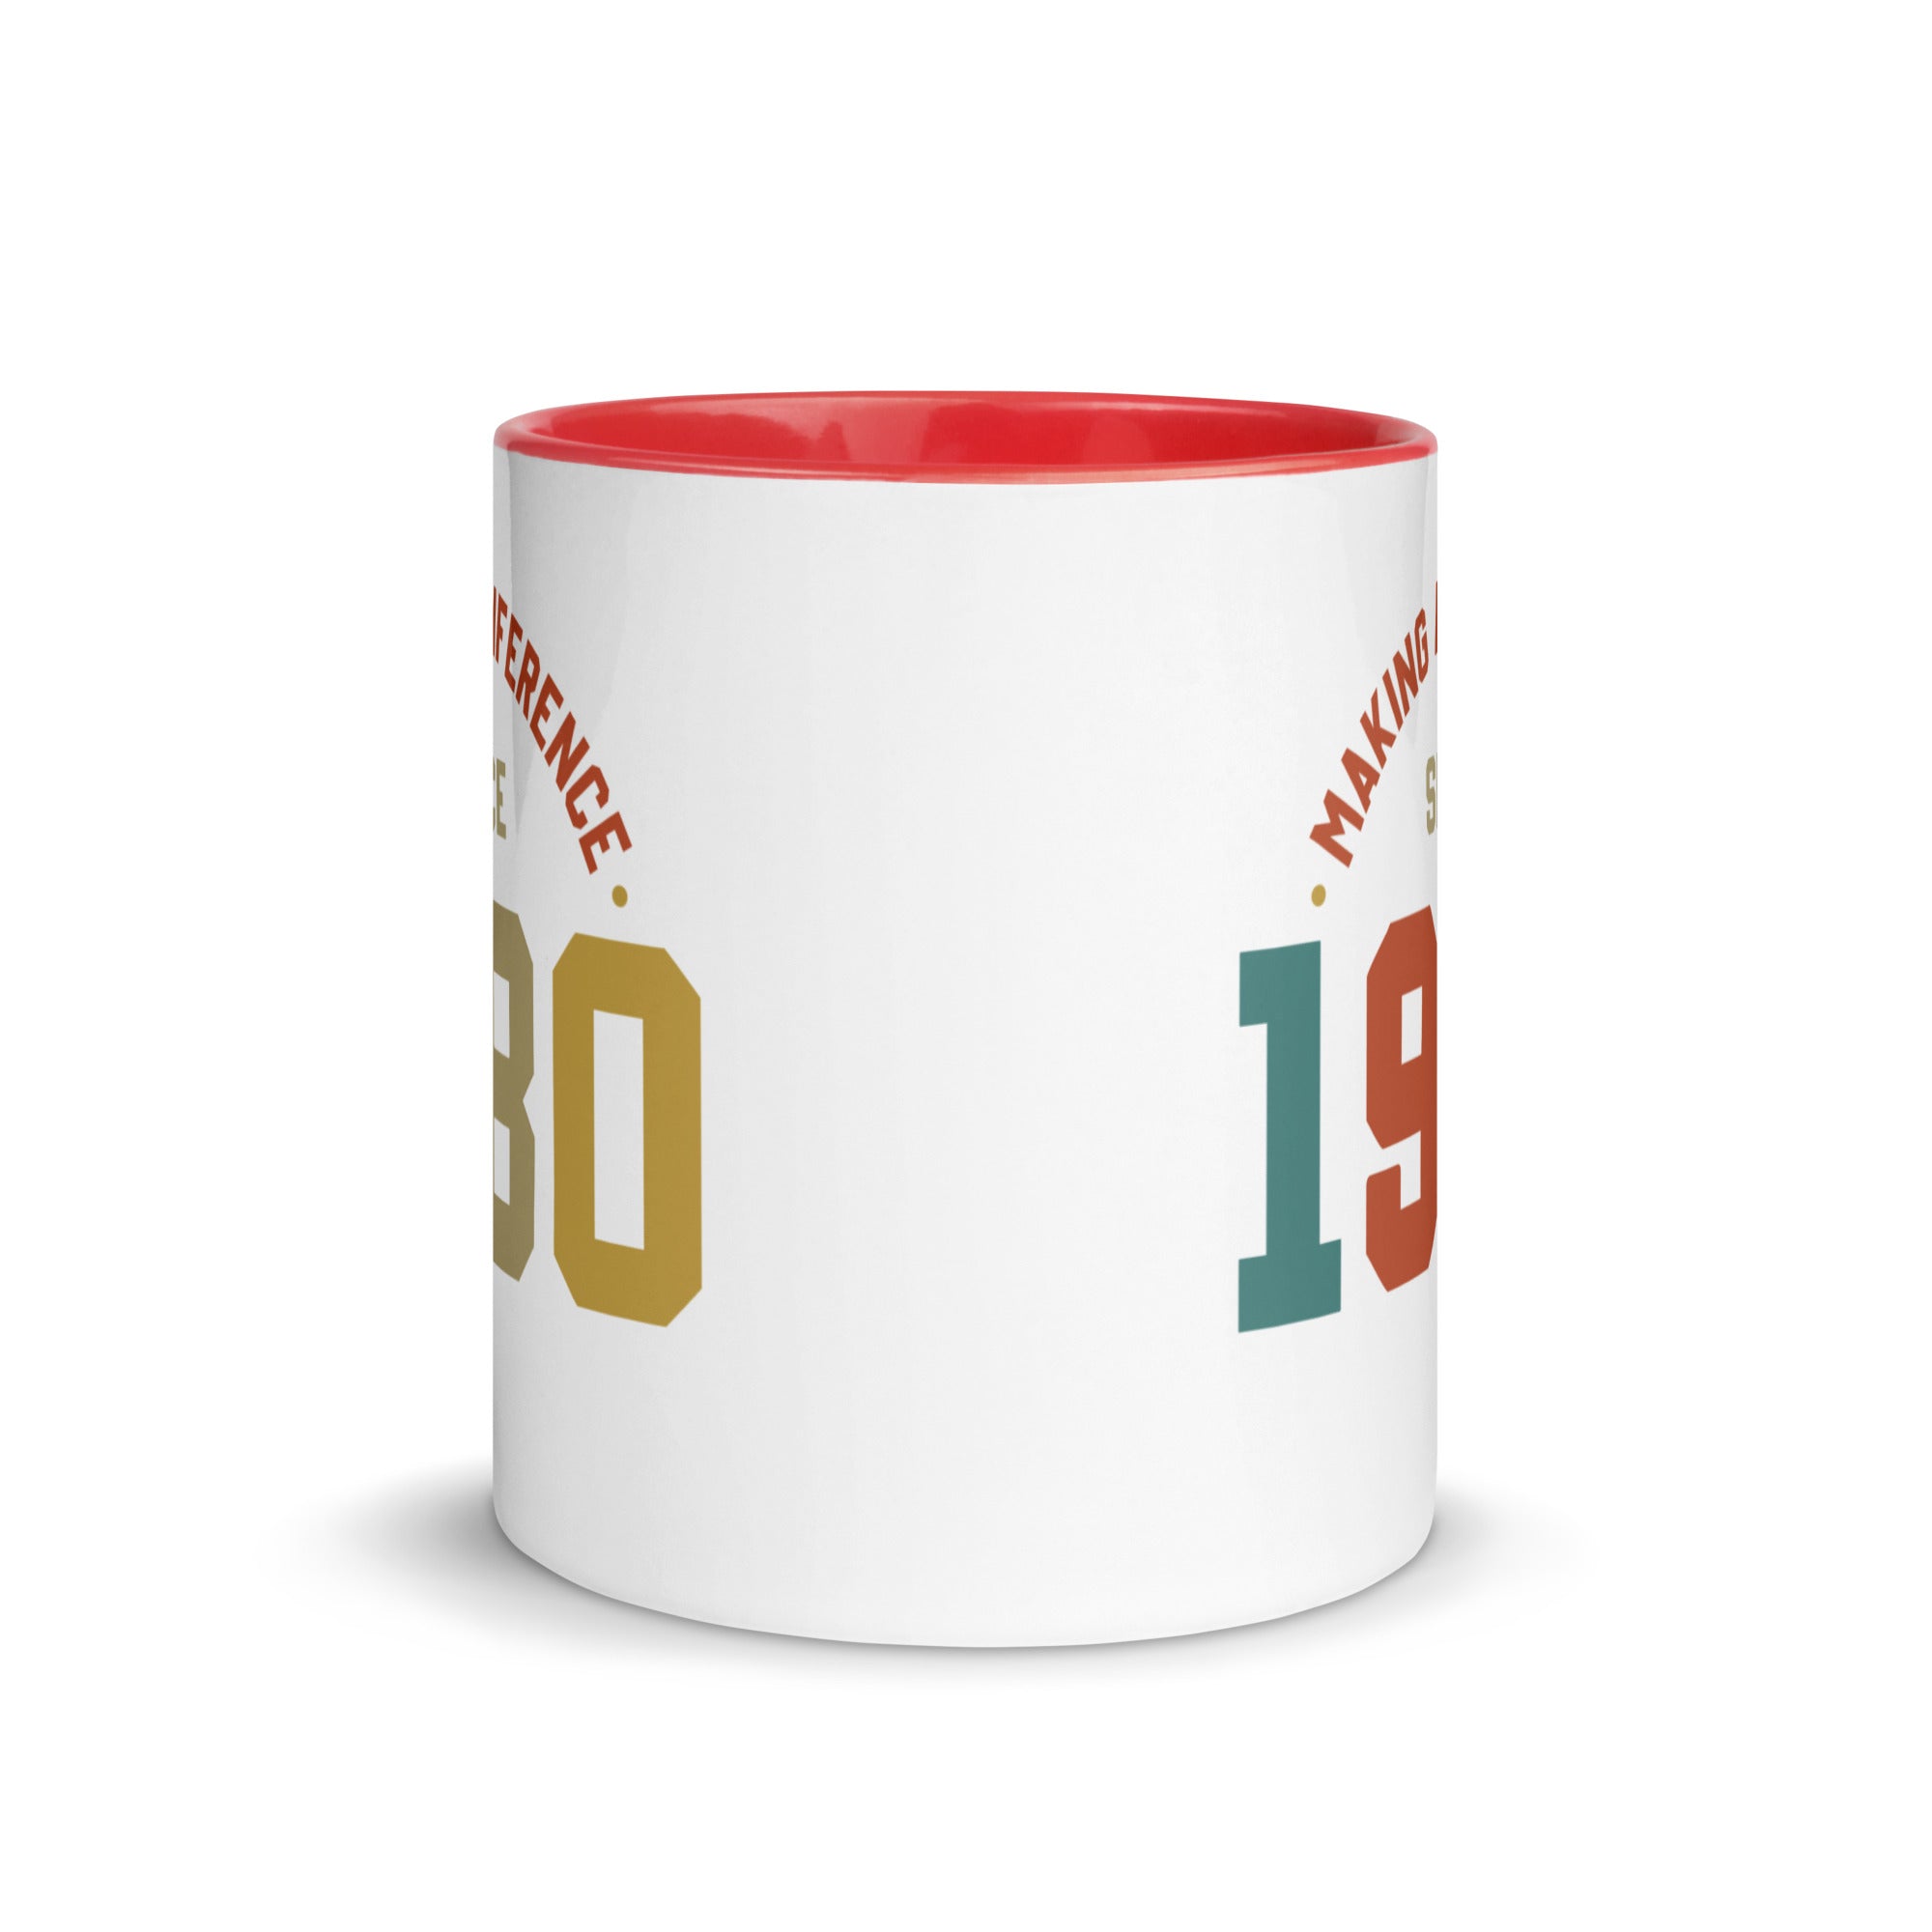 Mug with Color Inside | Making a diference since 1980